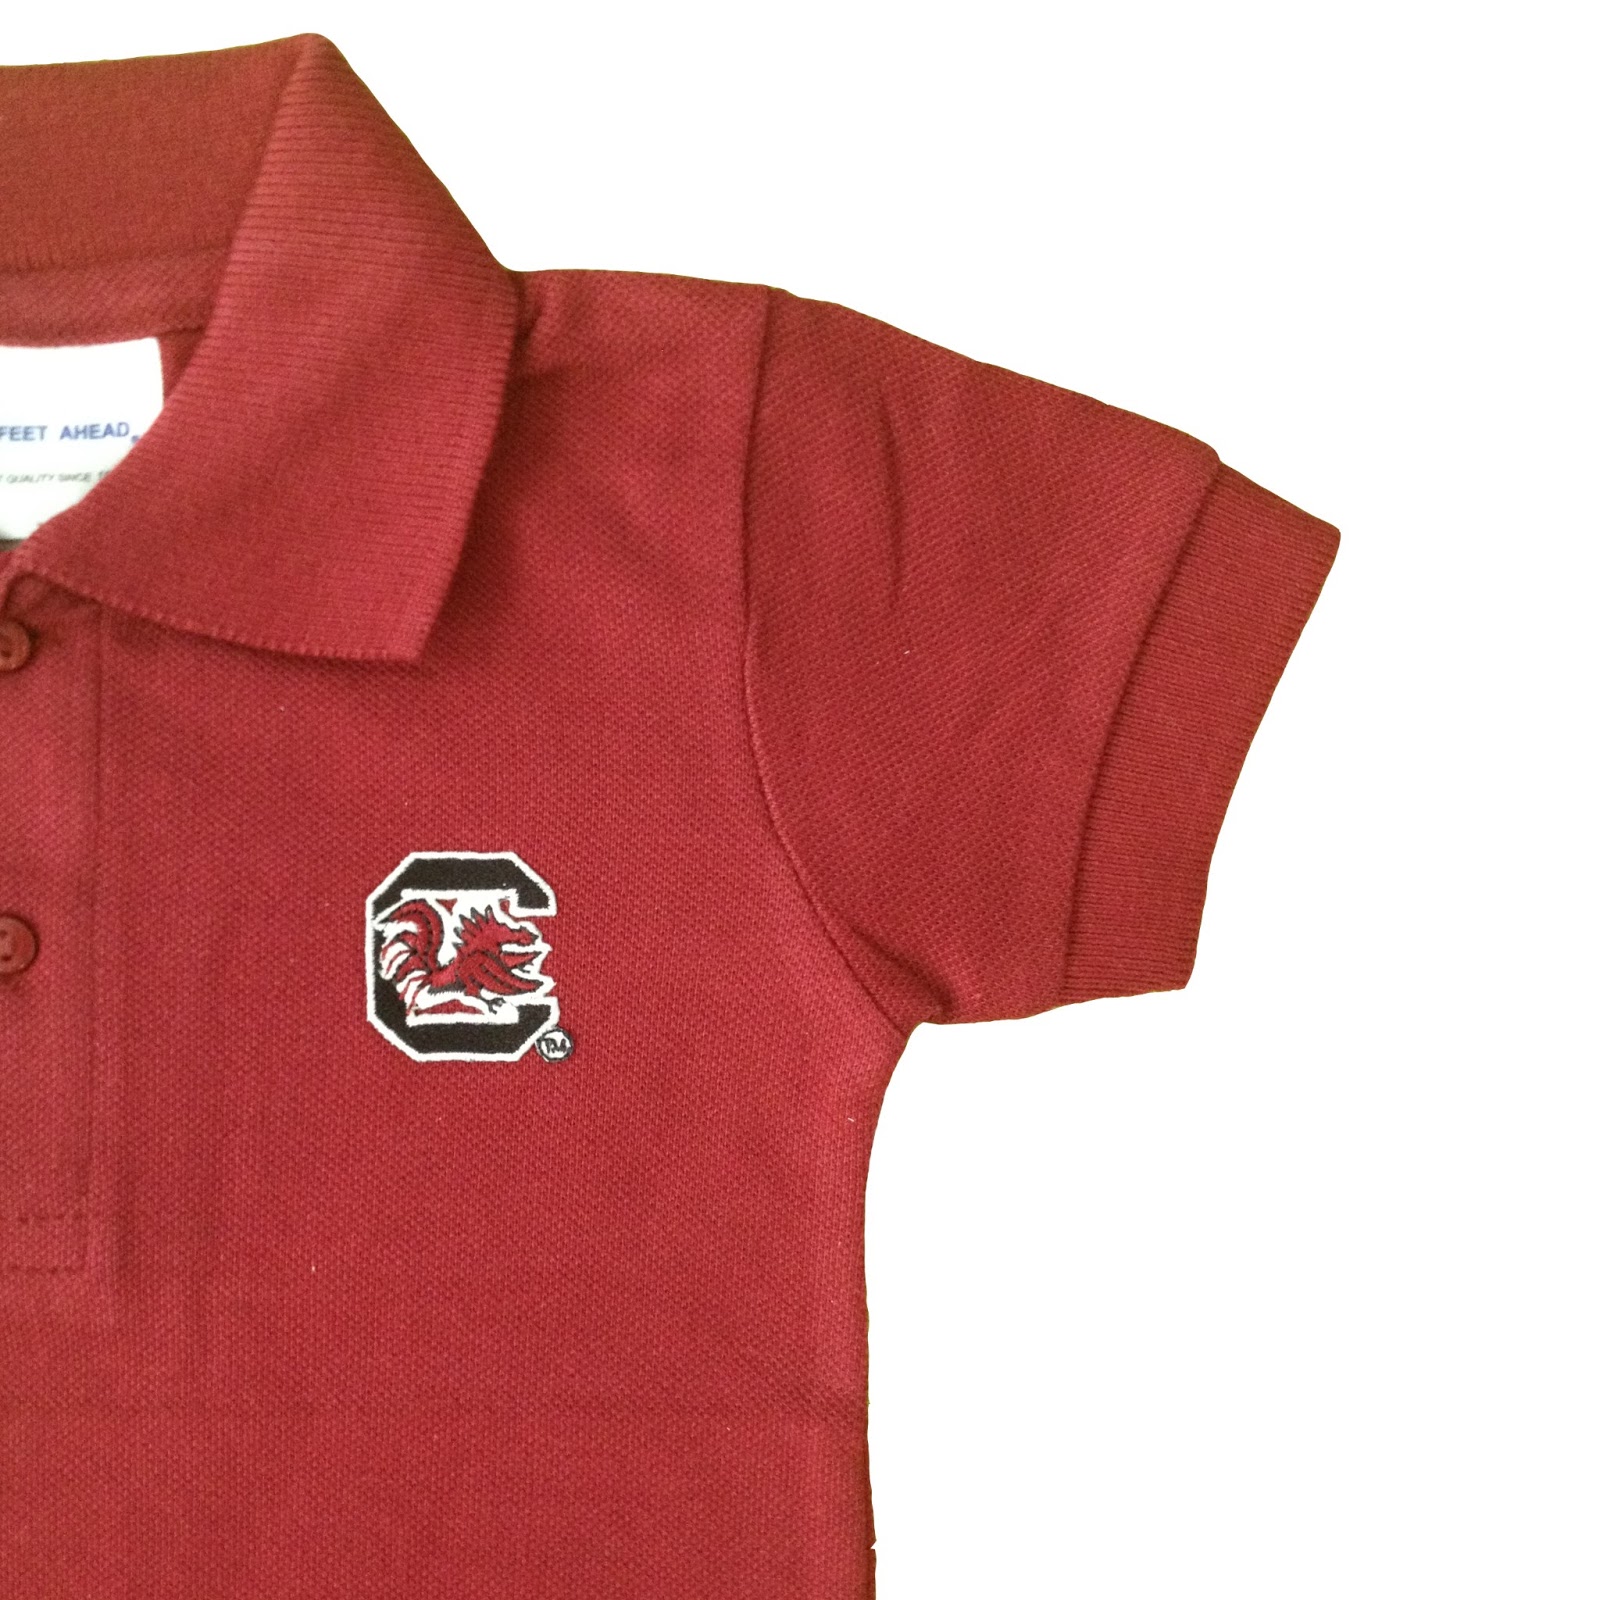 Gamecock Girl: Win a Gamecock polo romper onesie from Tailgate Tots!